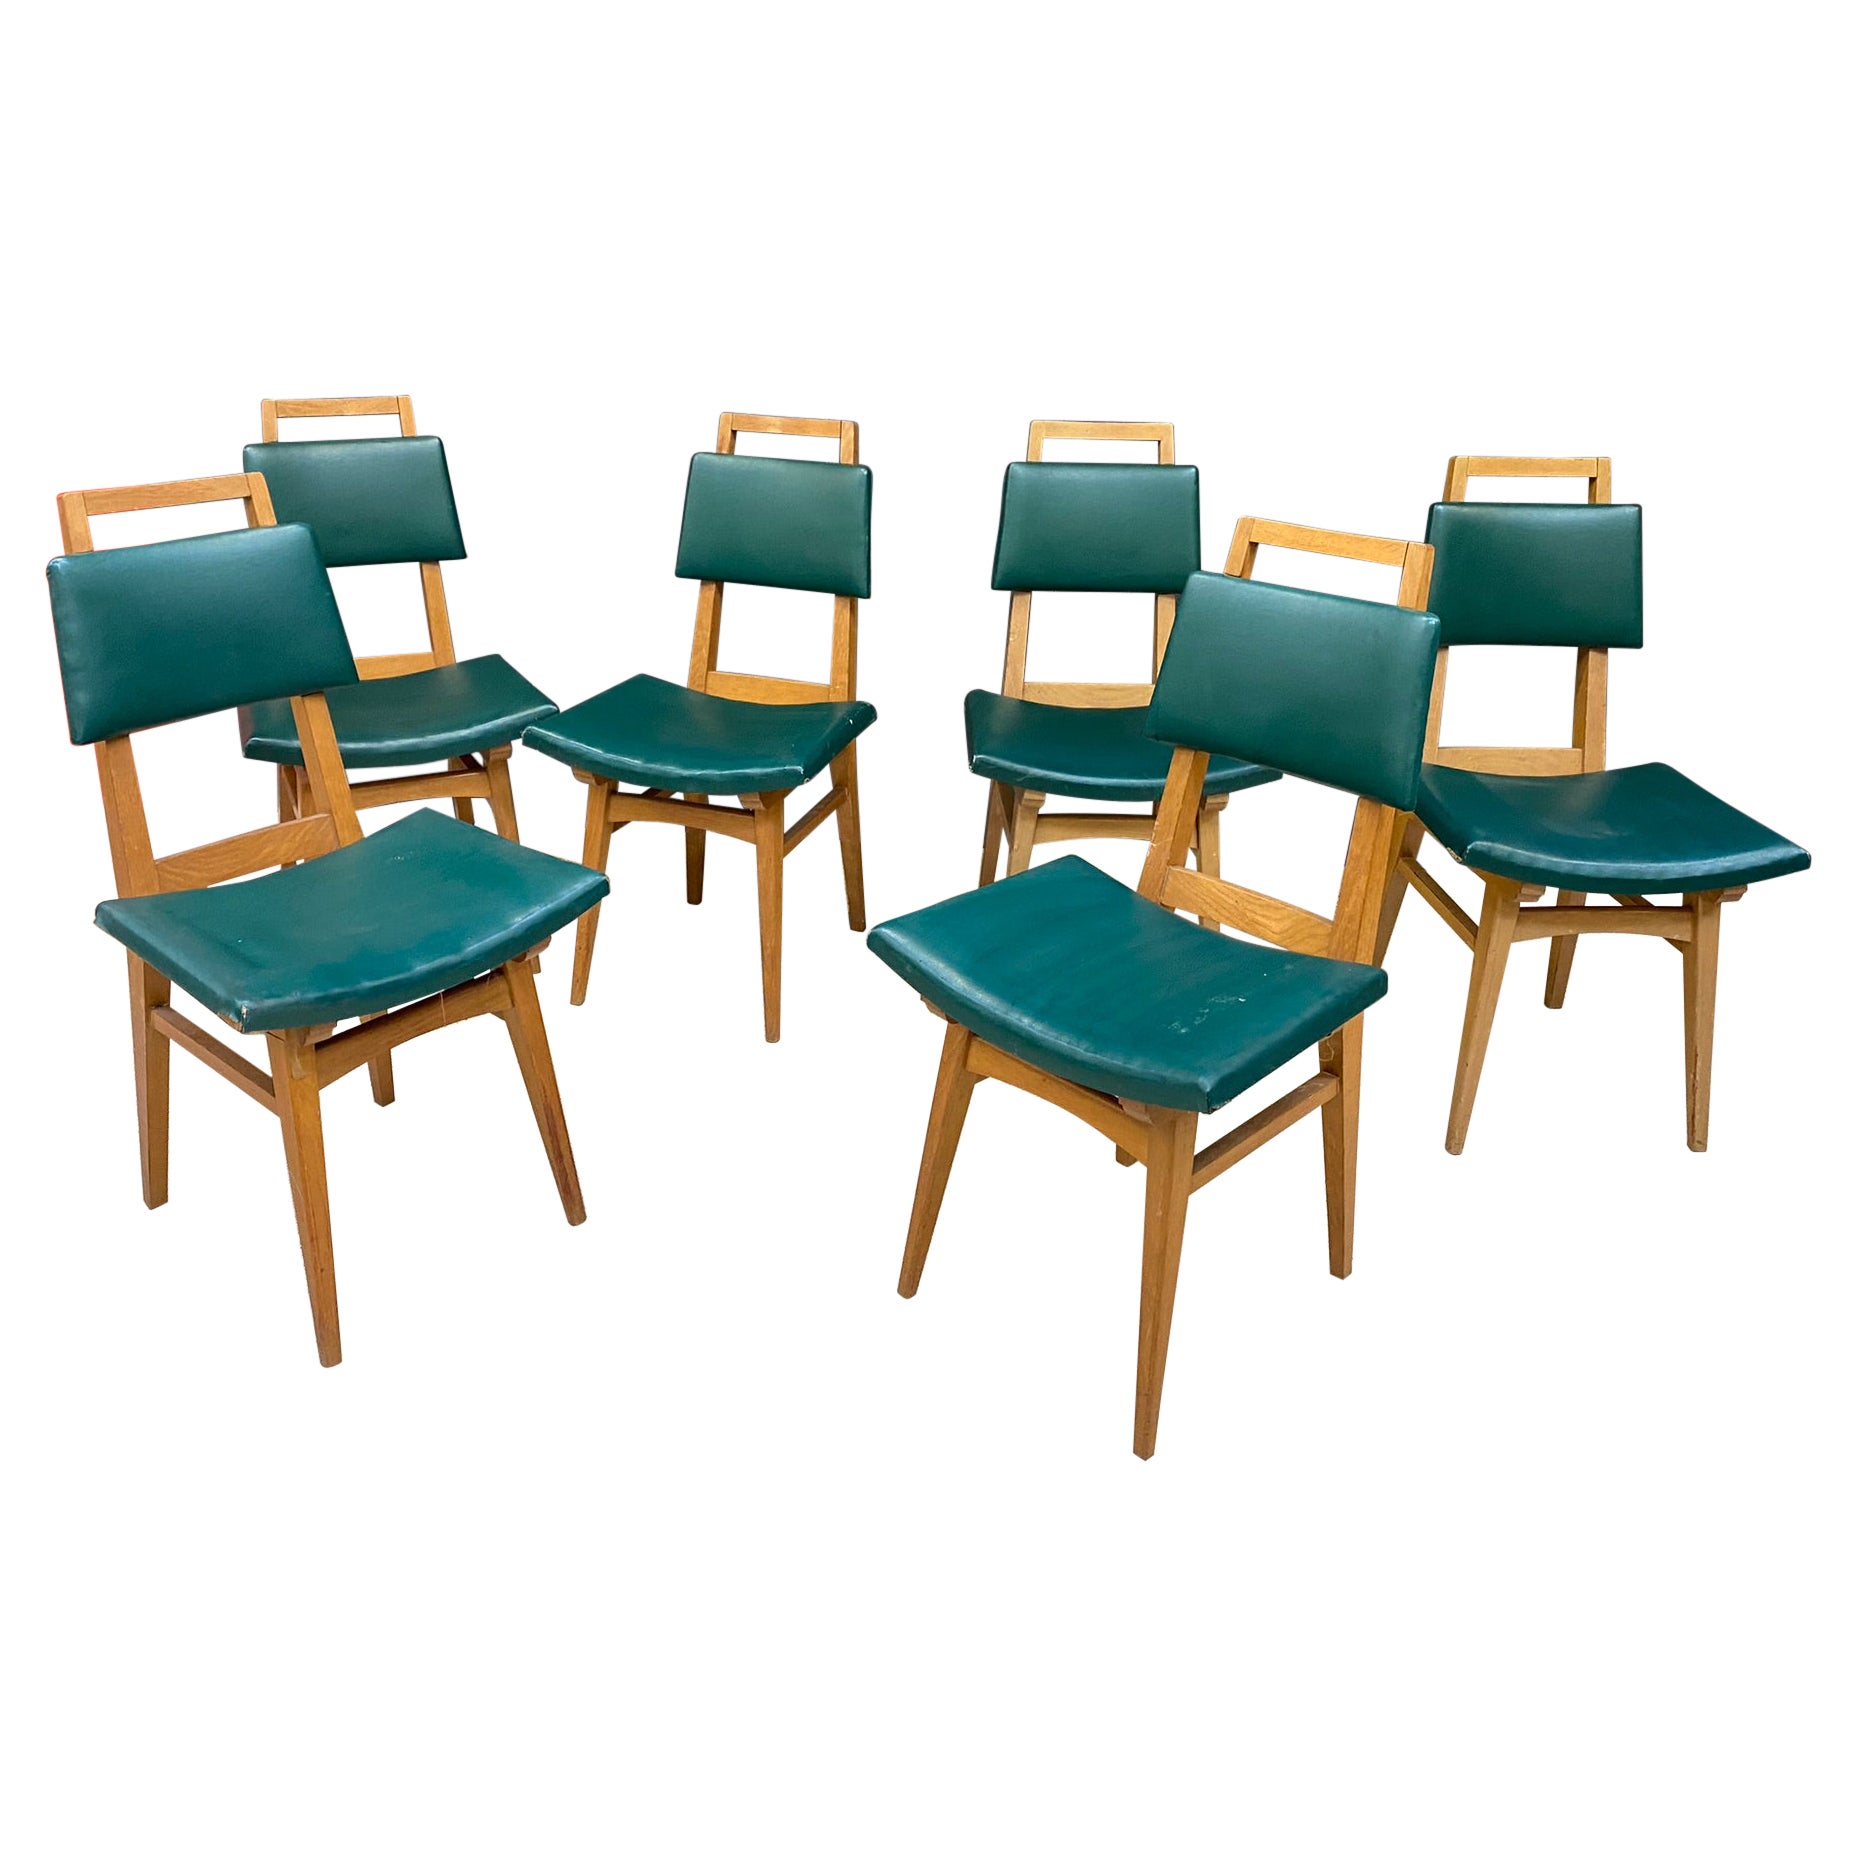 Suite of 6 Oak Chairs, circa 1950